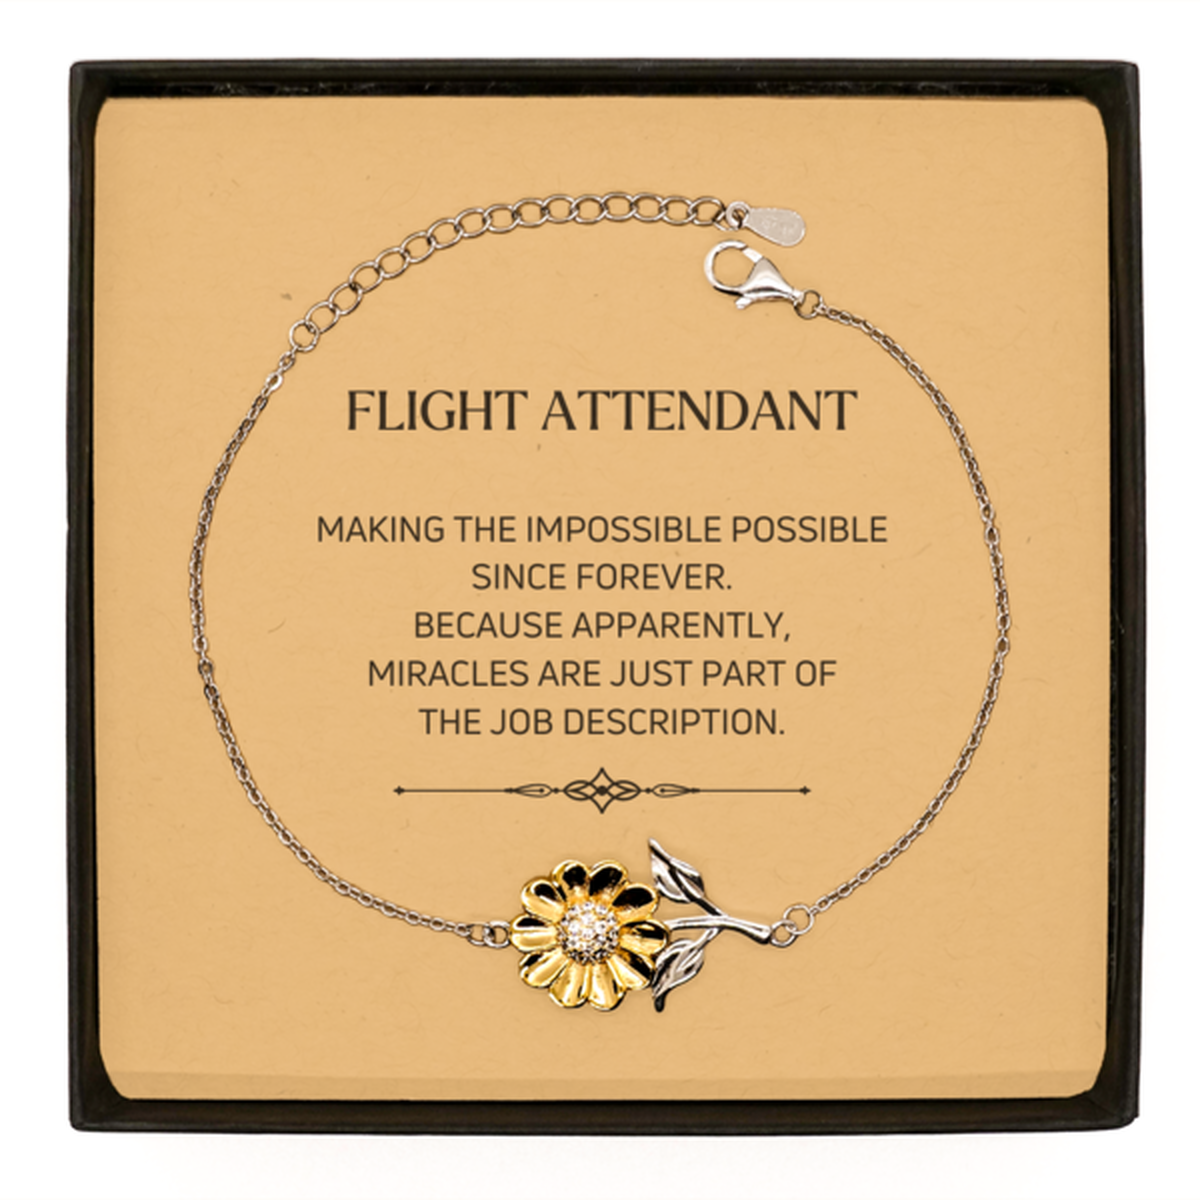 Funny Flight Attendant Gifts, Miracles are just part of the job description, Inspirational Birthday Sunflower Bracelet For Flight Attendant, Men, Women, Coworkers, Friends, Boss